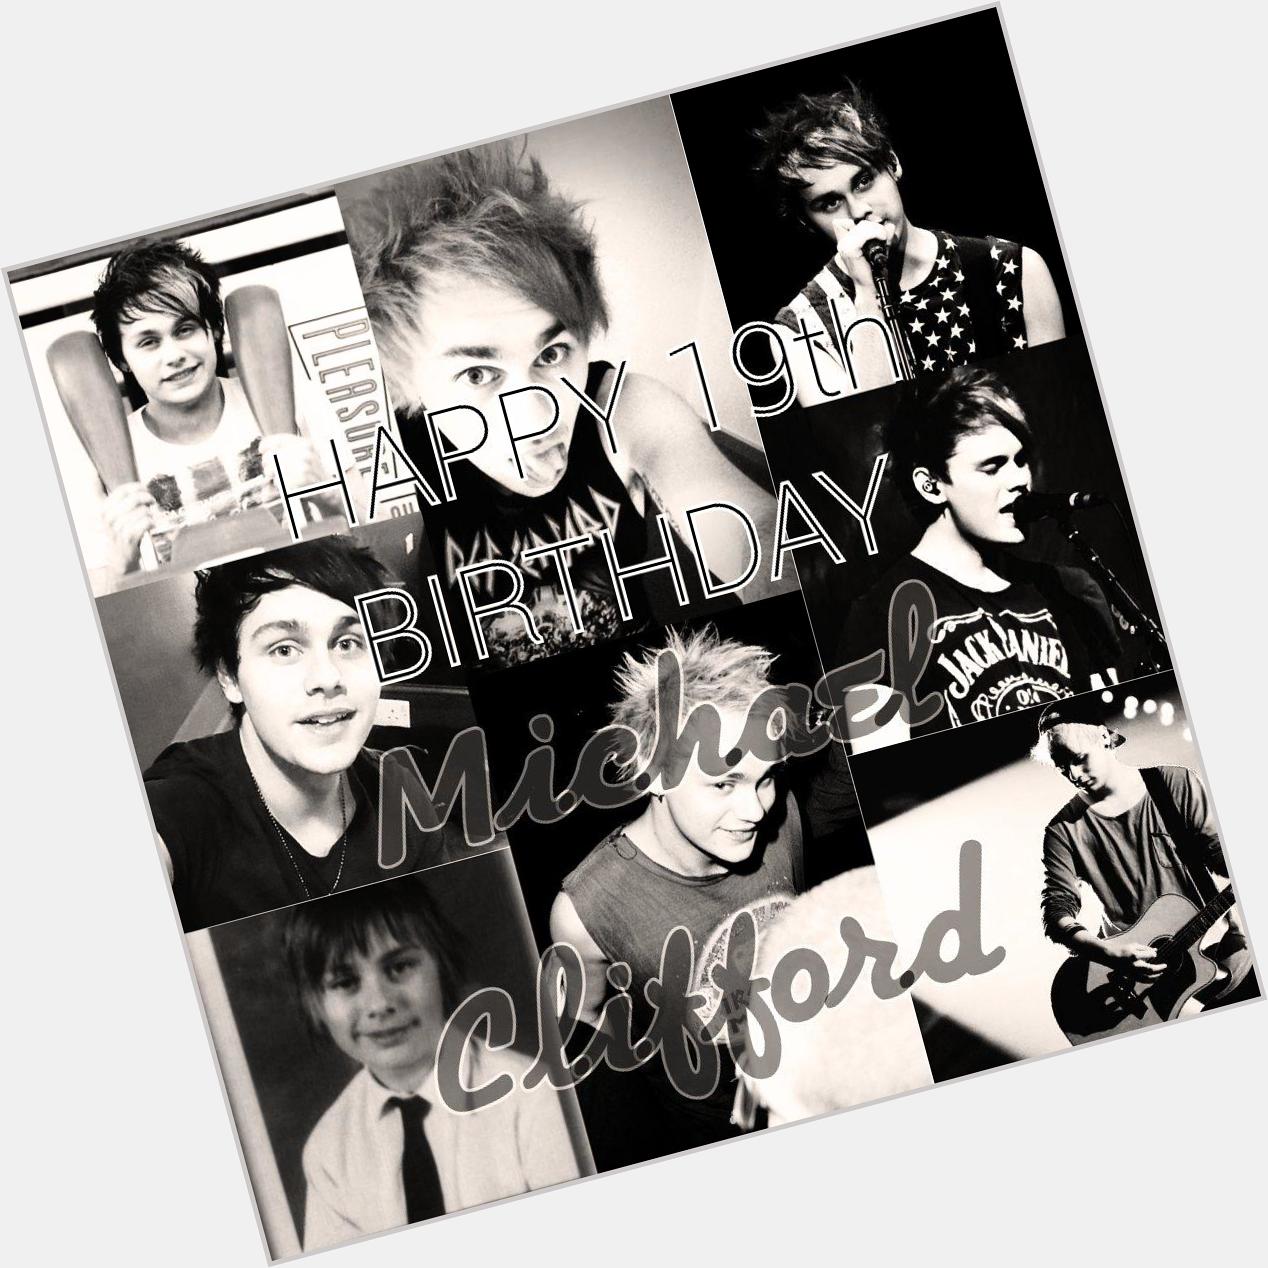 HAPPY 19TH BIRTHDAY MICHAEL GORDON CLIFFORD, I LOVE YOU AND YOUR BAND SO MUCH!!! :-) 